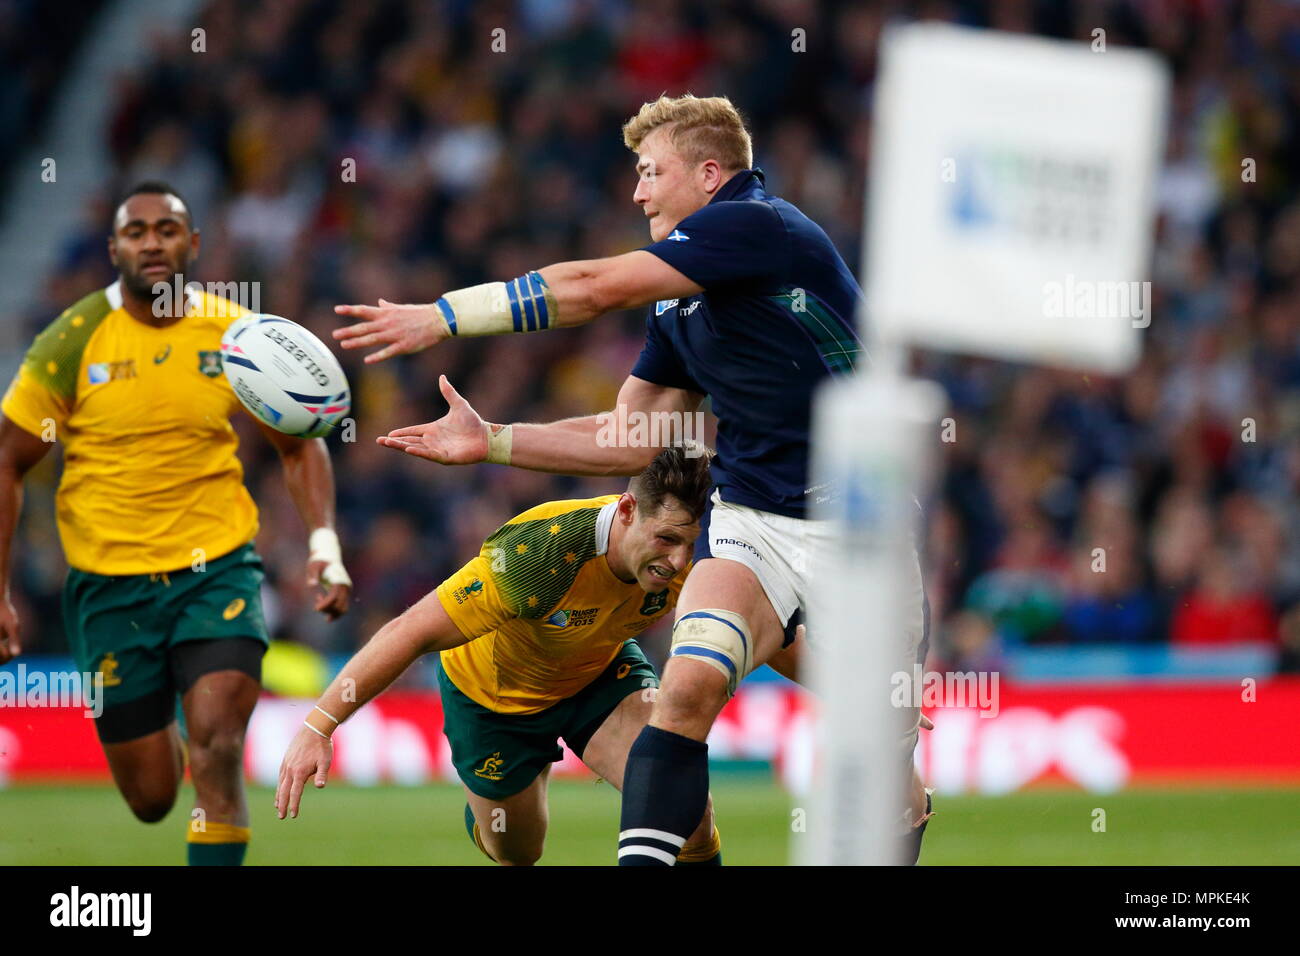 Dave Denton feeds the ball down the wing just before getting caught buy Bernard Foley 1during the IRB RWC 2015 Quarter Final match between Australia v Scotland at Twickenham Stadium. London, England. 18 October 2015 --- Image by © Paul Cunningham Stock Photo